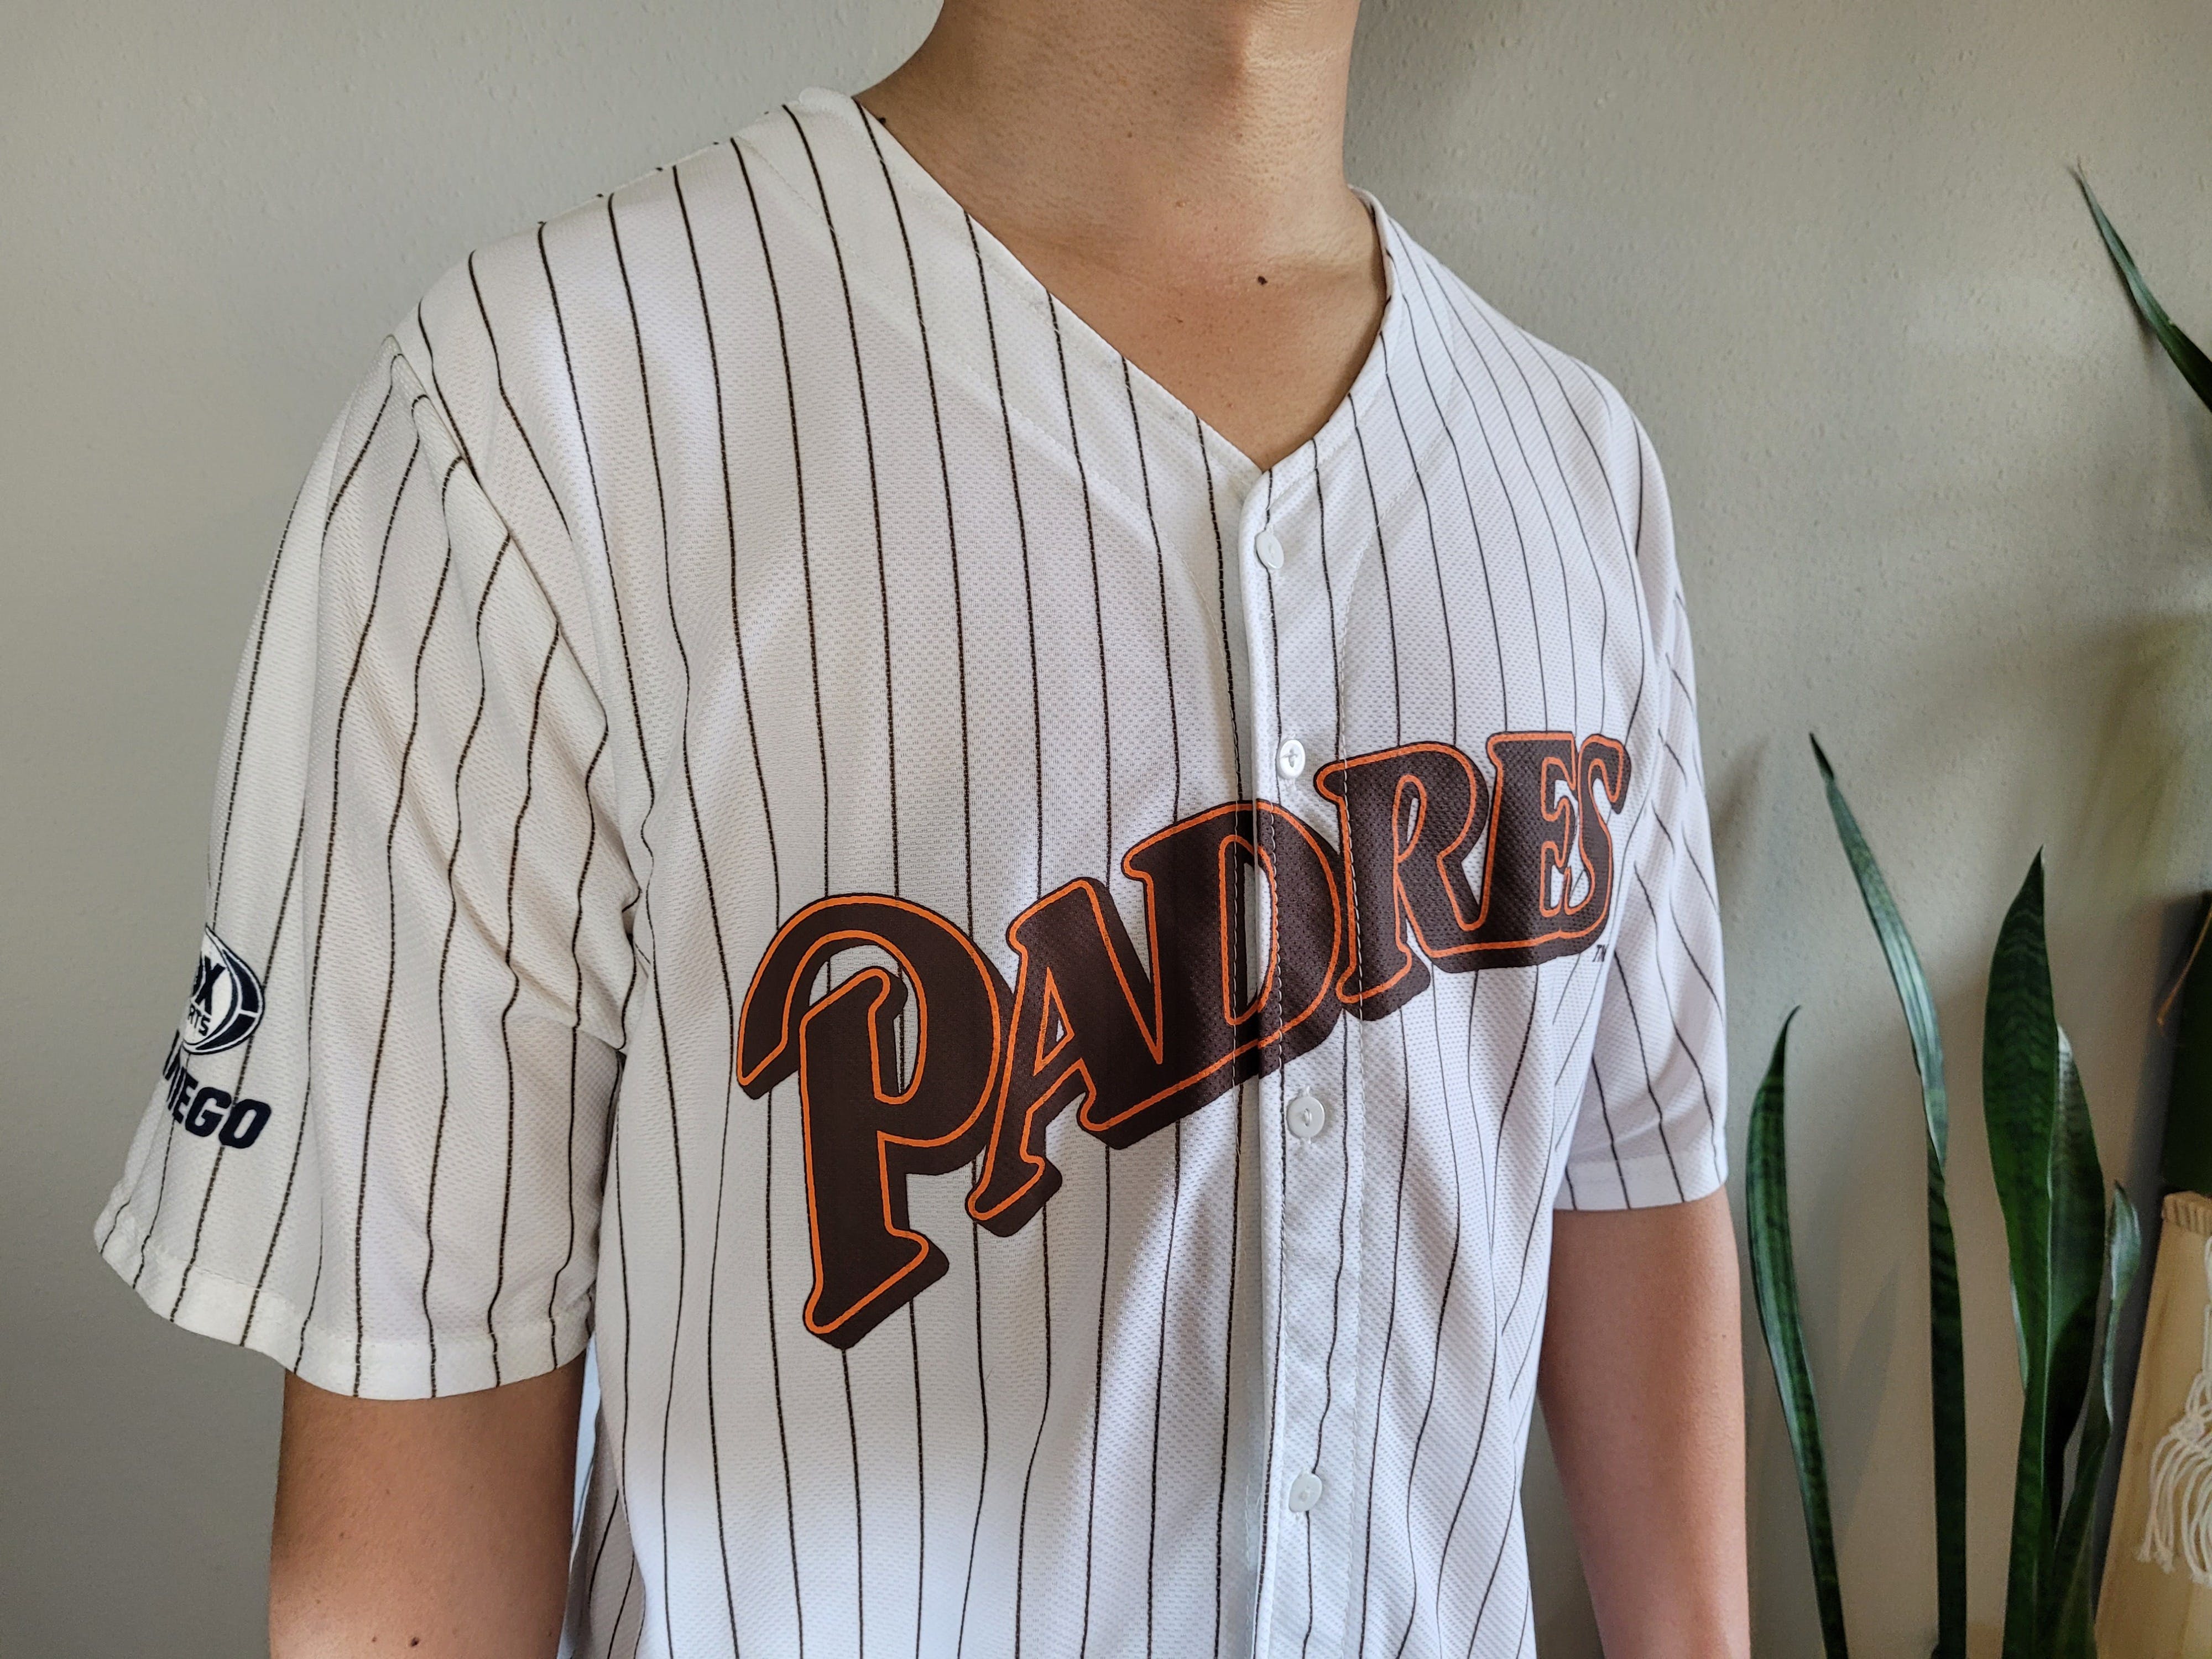 Vintage MLB White Padres Baseball Jersey for Garry Templeton #1 by Padres